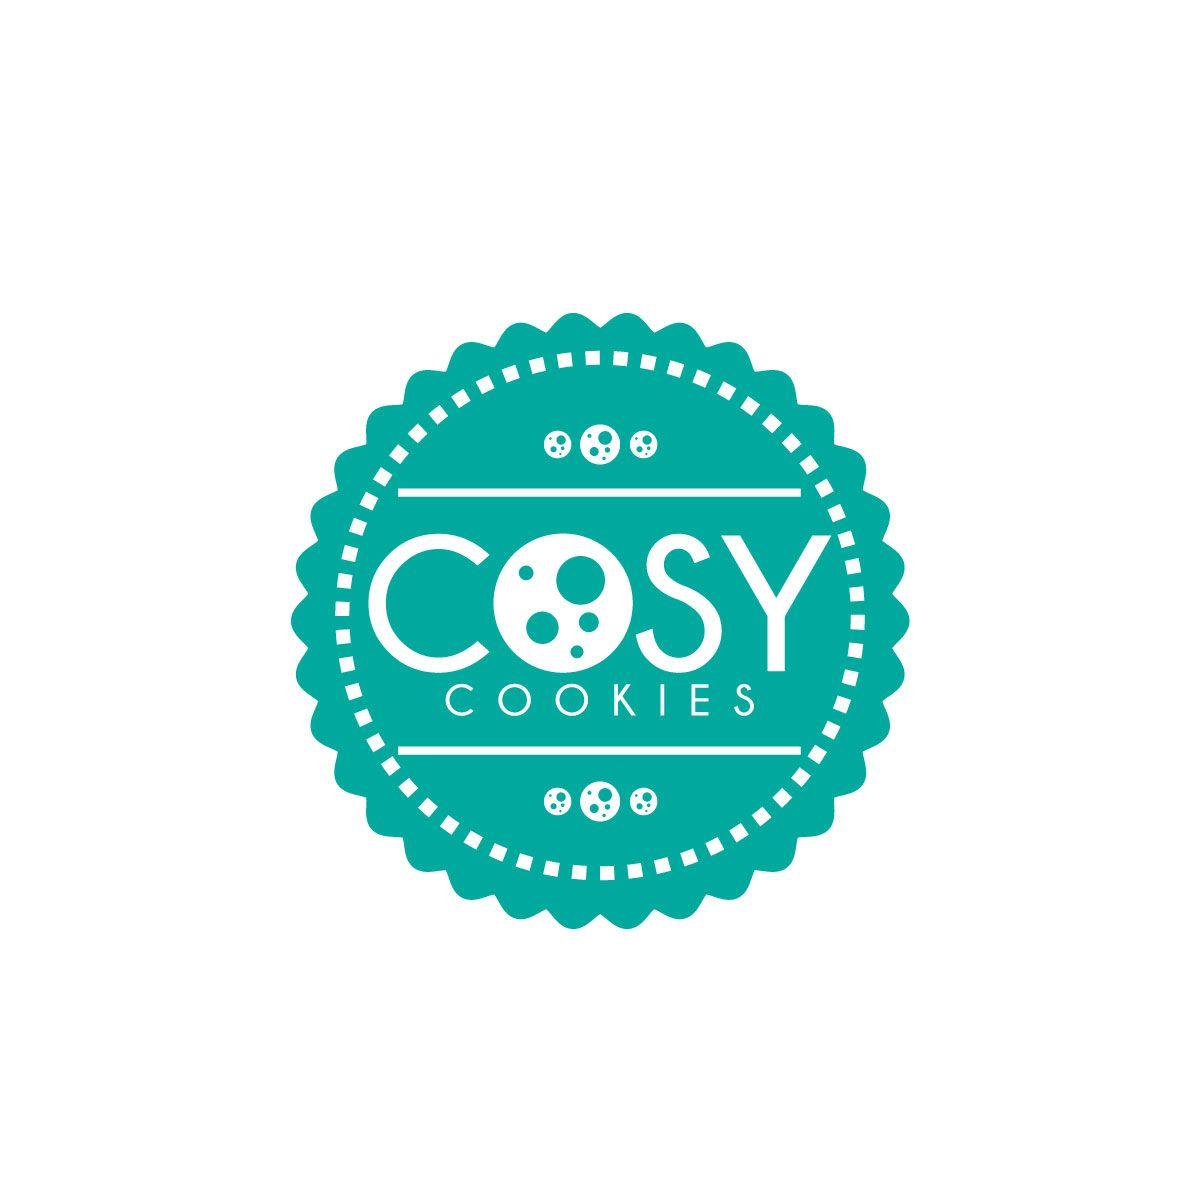 Cookie Company Logo - Modern, Personable, It Company Logo Design for Cosy Cookies by ...